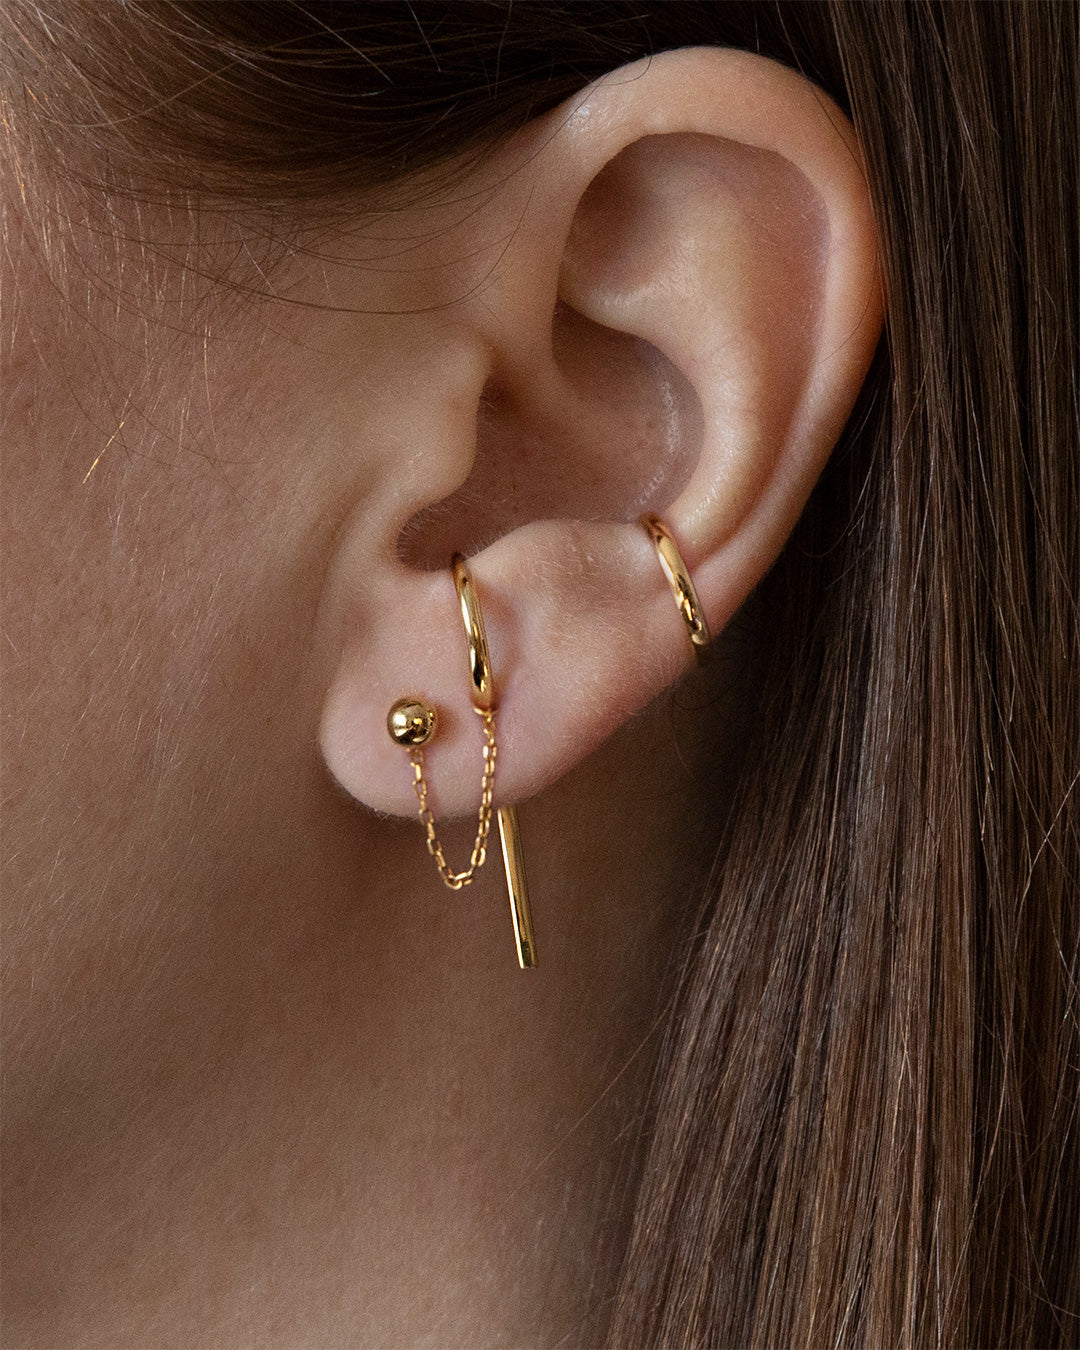 The Coolest Ear Piercing Combos To Try Right Now | Girlfriend